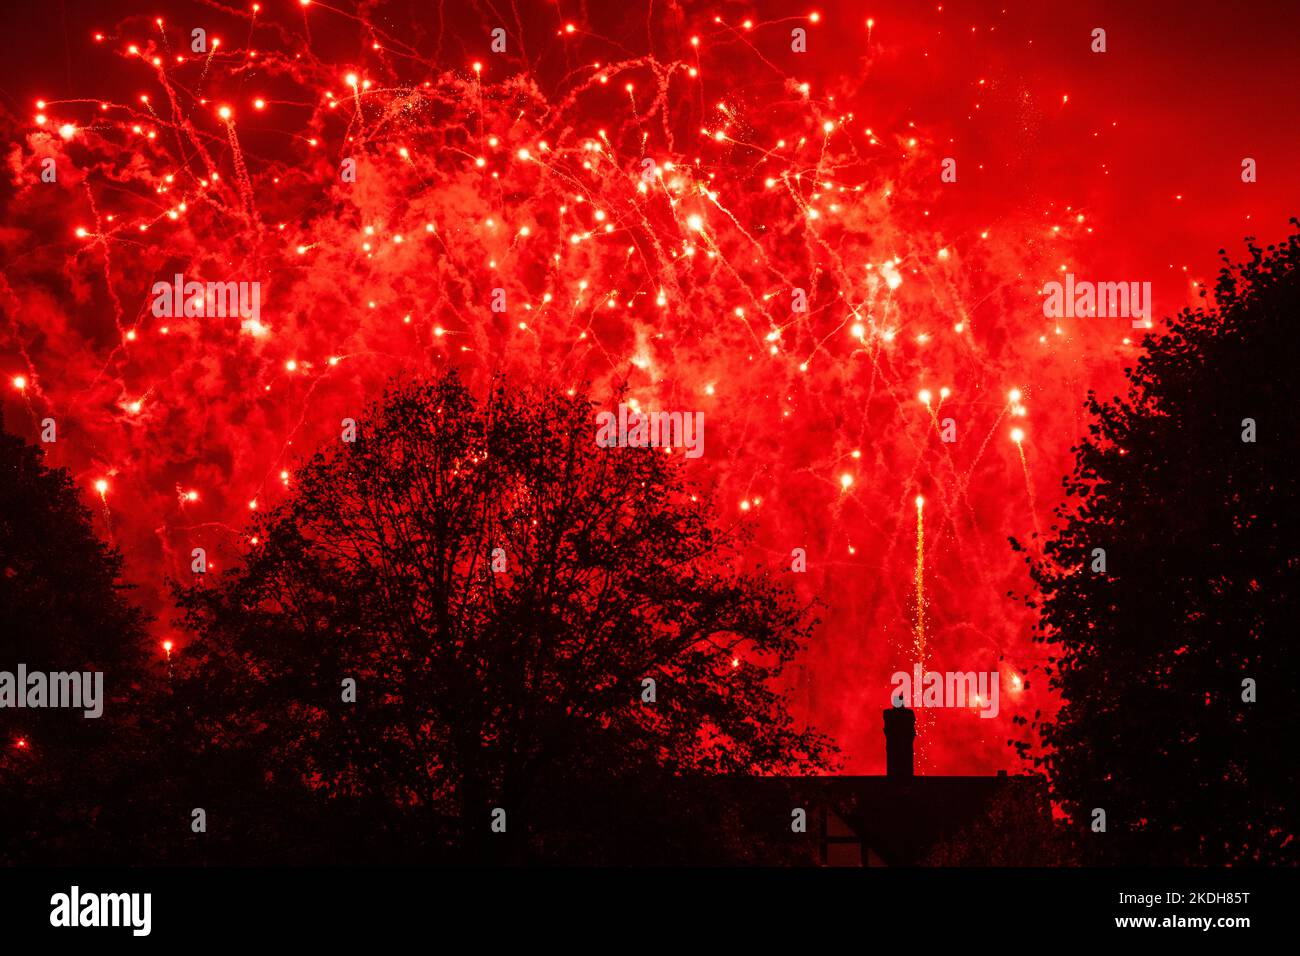 Fireworks exploding in the sky silhouette of buyer cottage and trees red and yellow Stock Photo